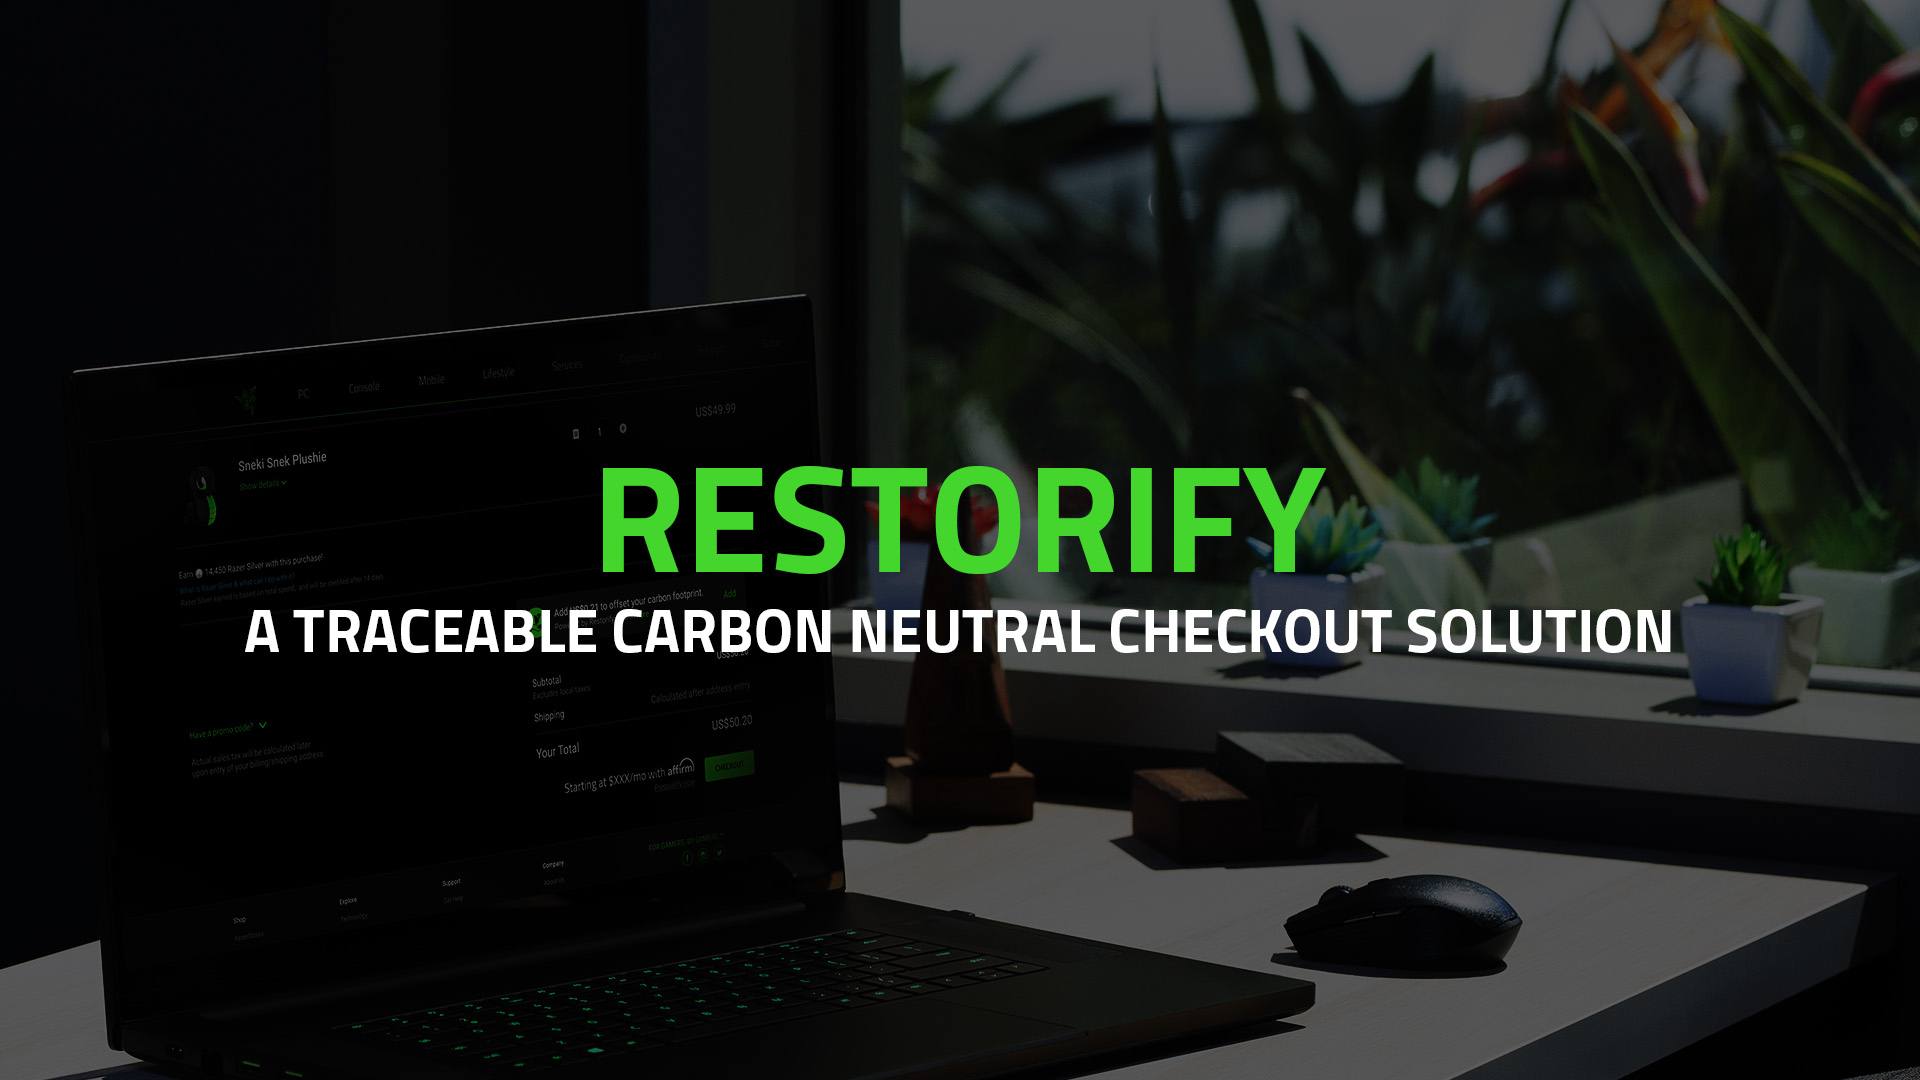 Available on Razer.com effective today, Restorify provides consumers with the opportunity to offset their purchases with traceable carbon credits and helps businesses calculate their products’ carbon footprint.